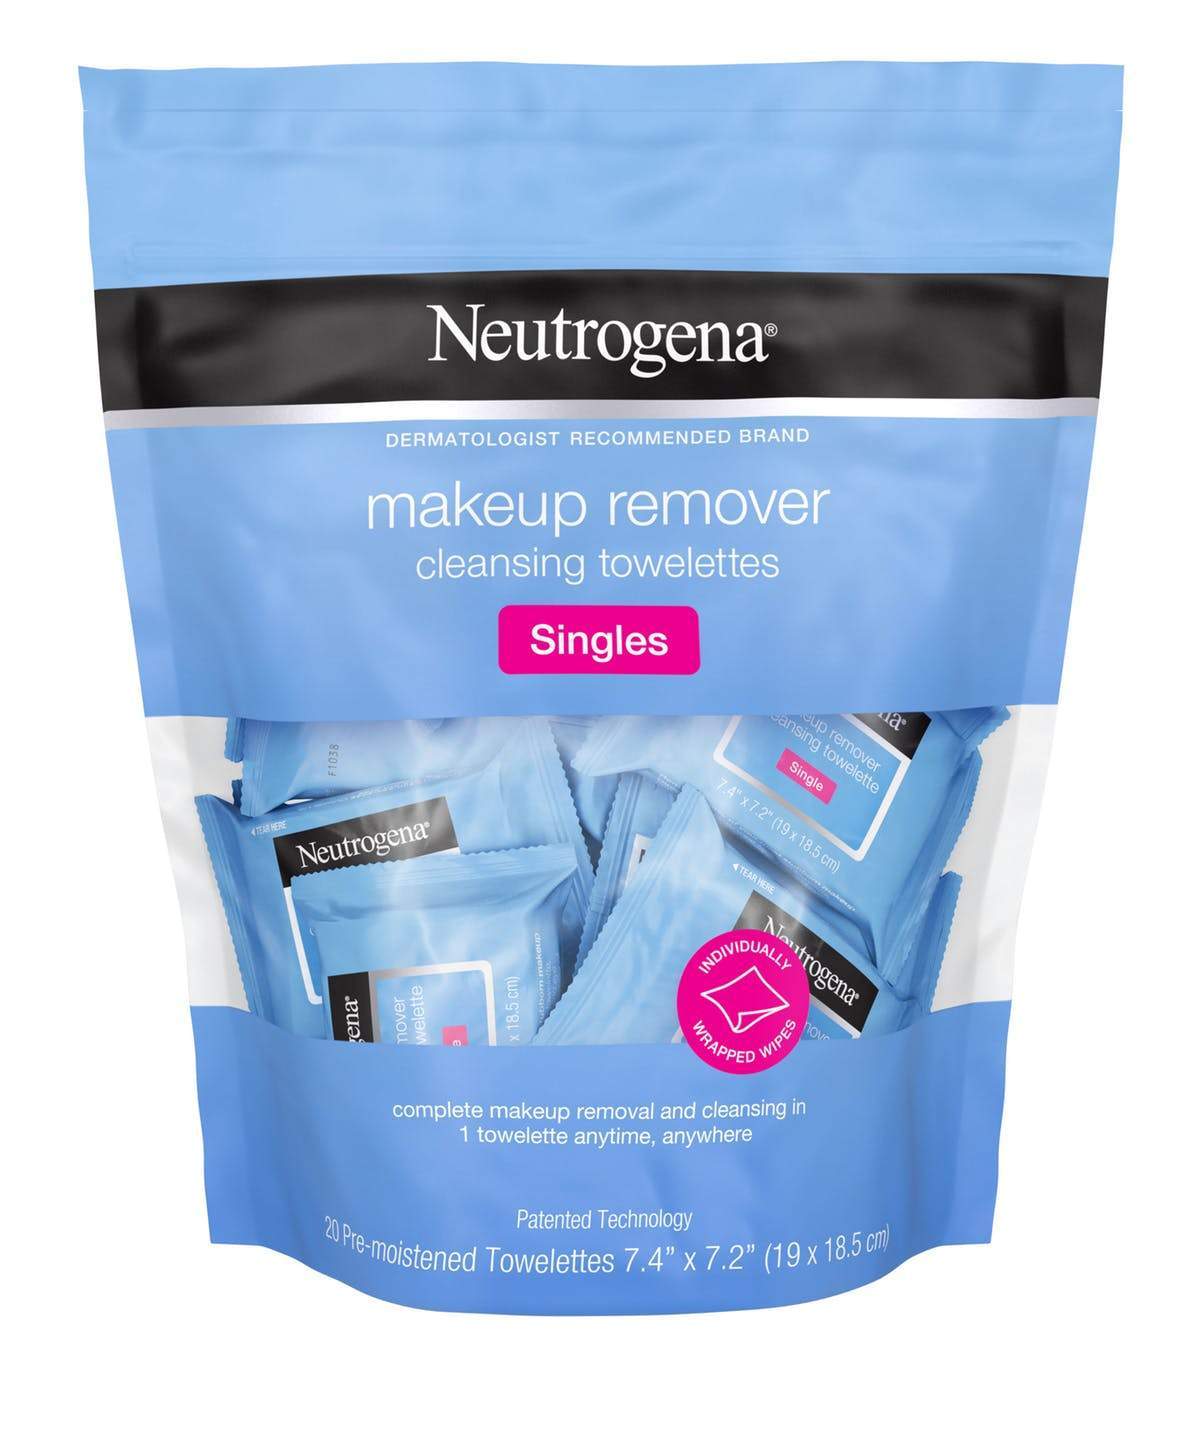 Neutrogena® Makeup Remover Cleansing Towelettes Singles - 20pc, makeup remover, London Loves Beauty